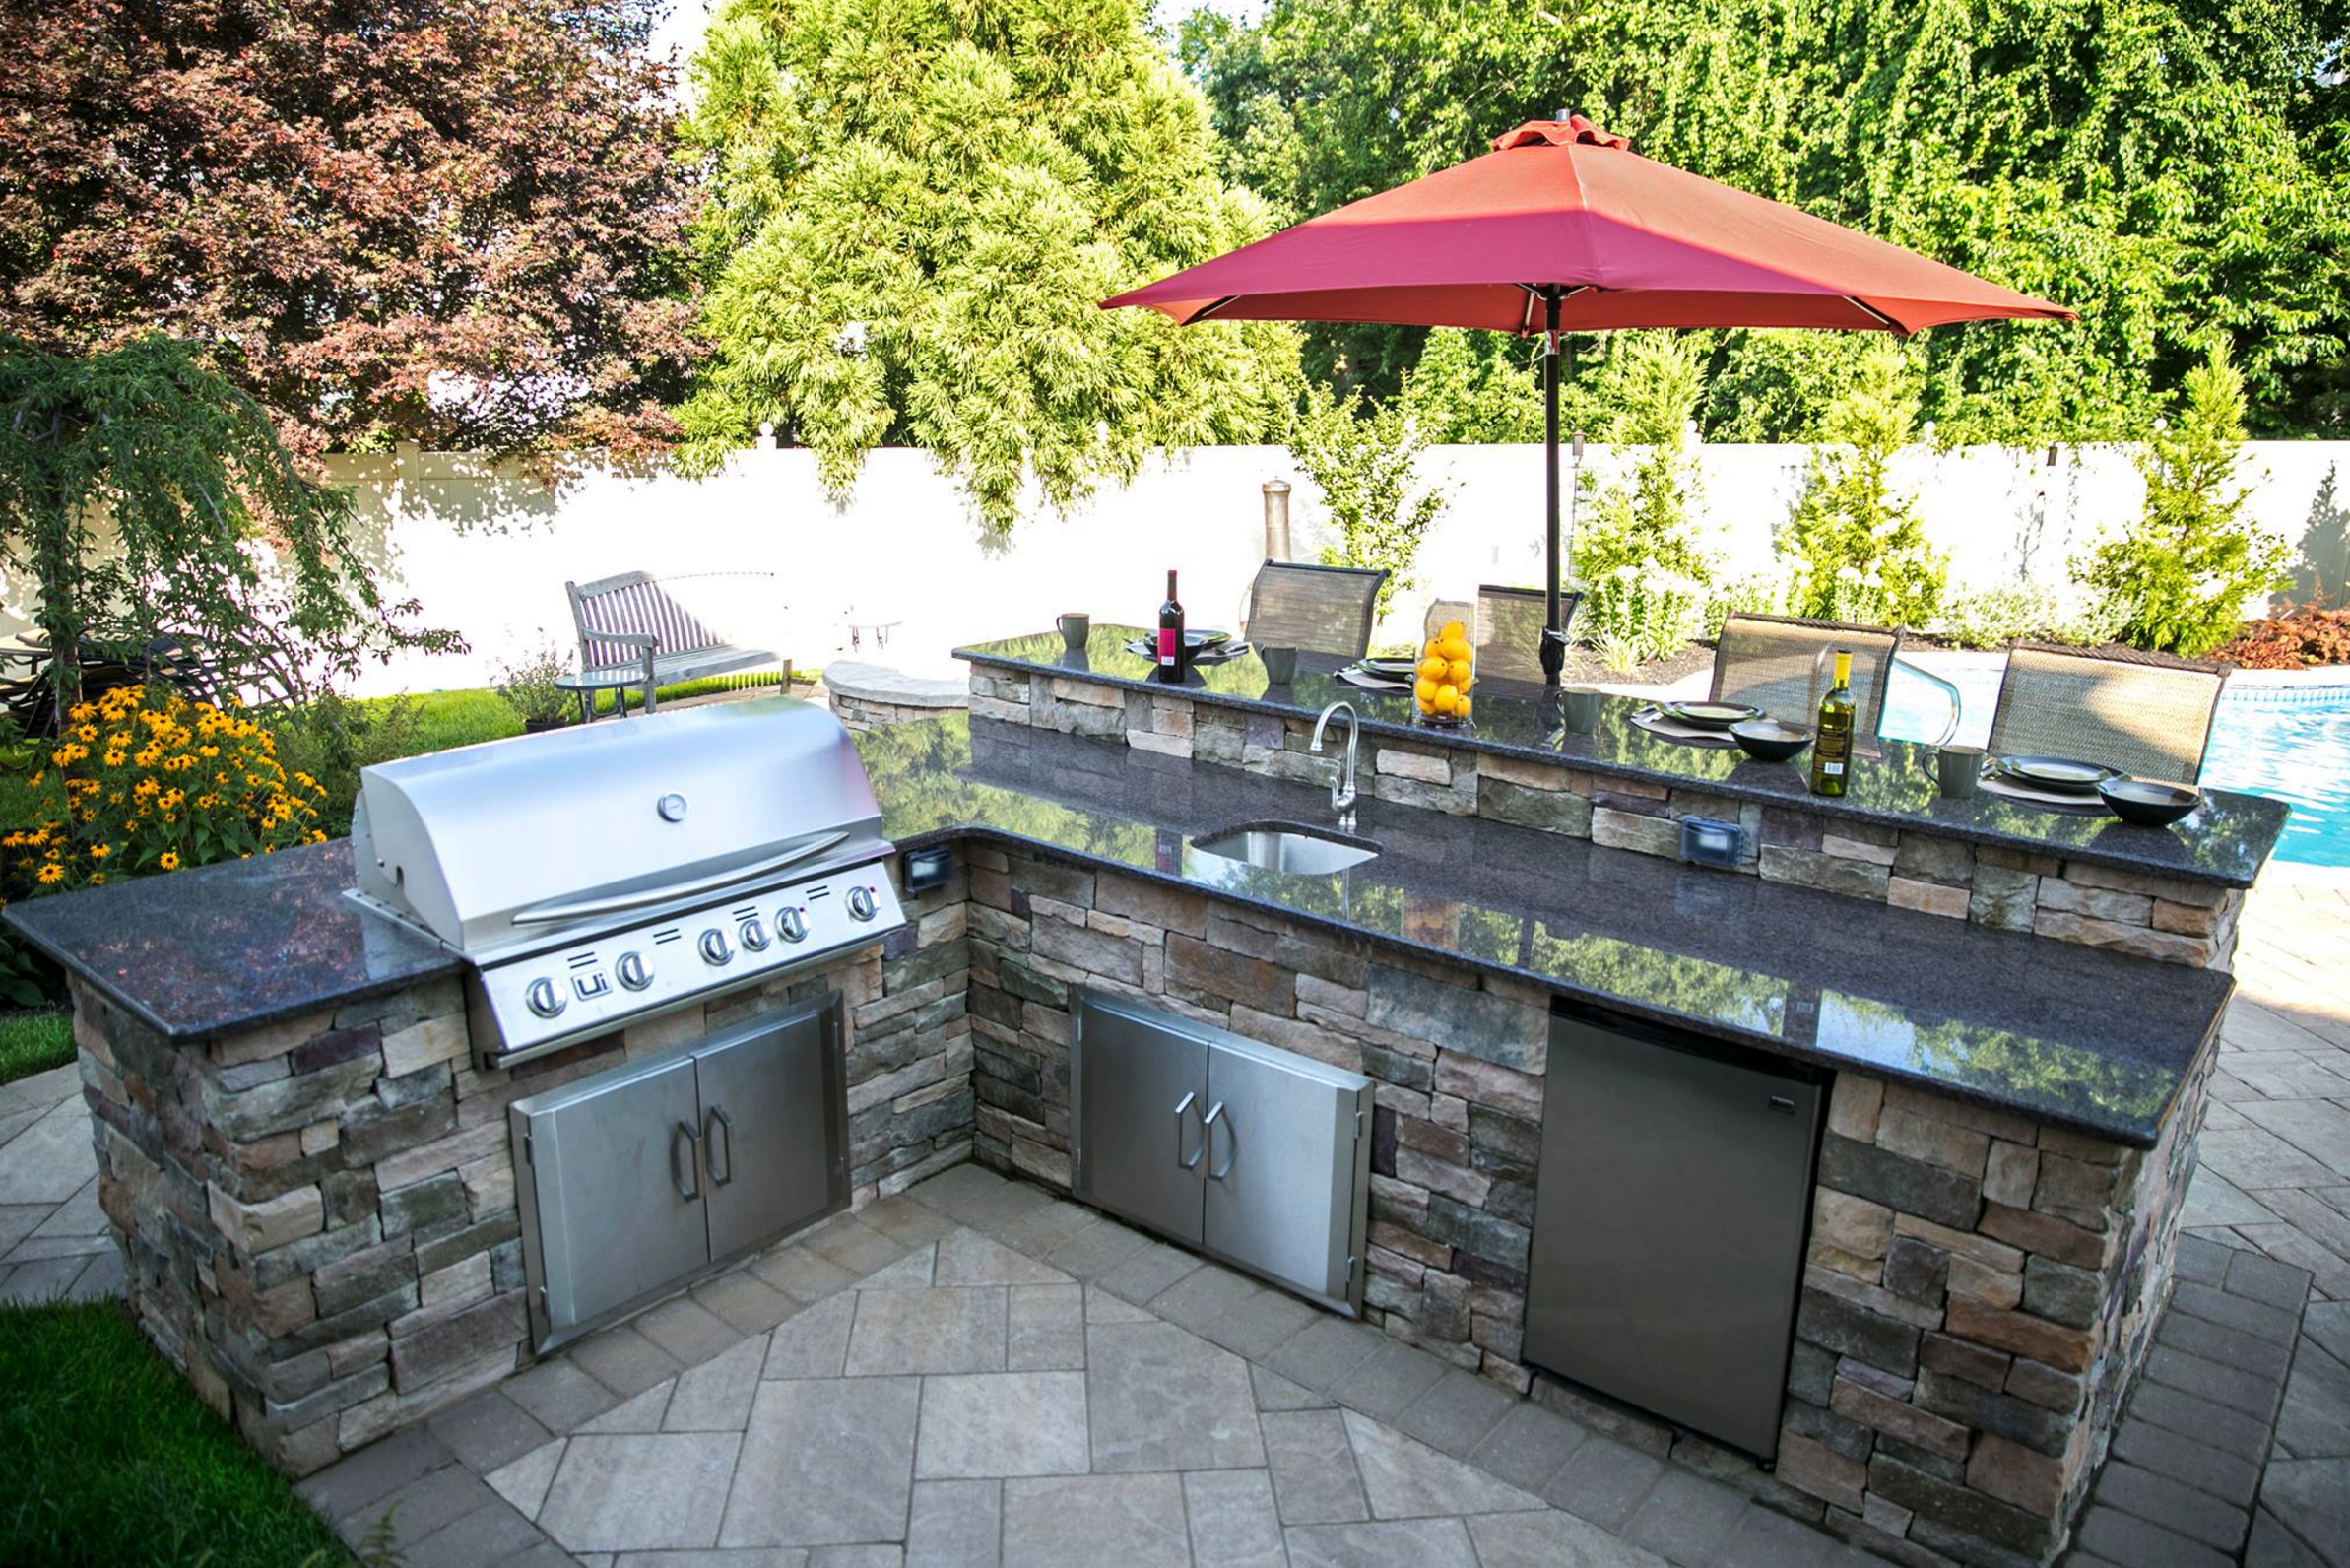  At home relaxation  OUTDOOR KITCHENS IN SOUTHAMPTON, NY    LEARN MORE  